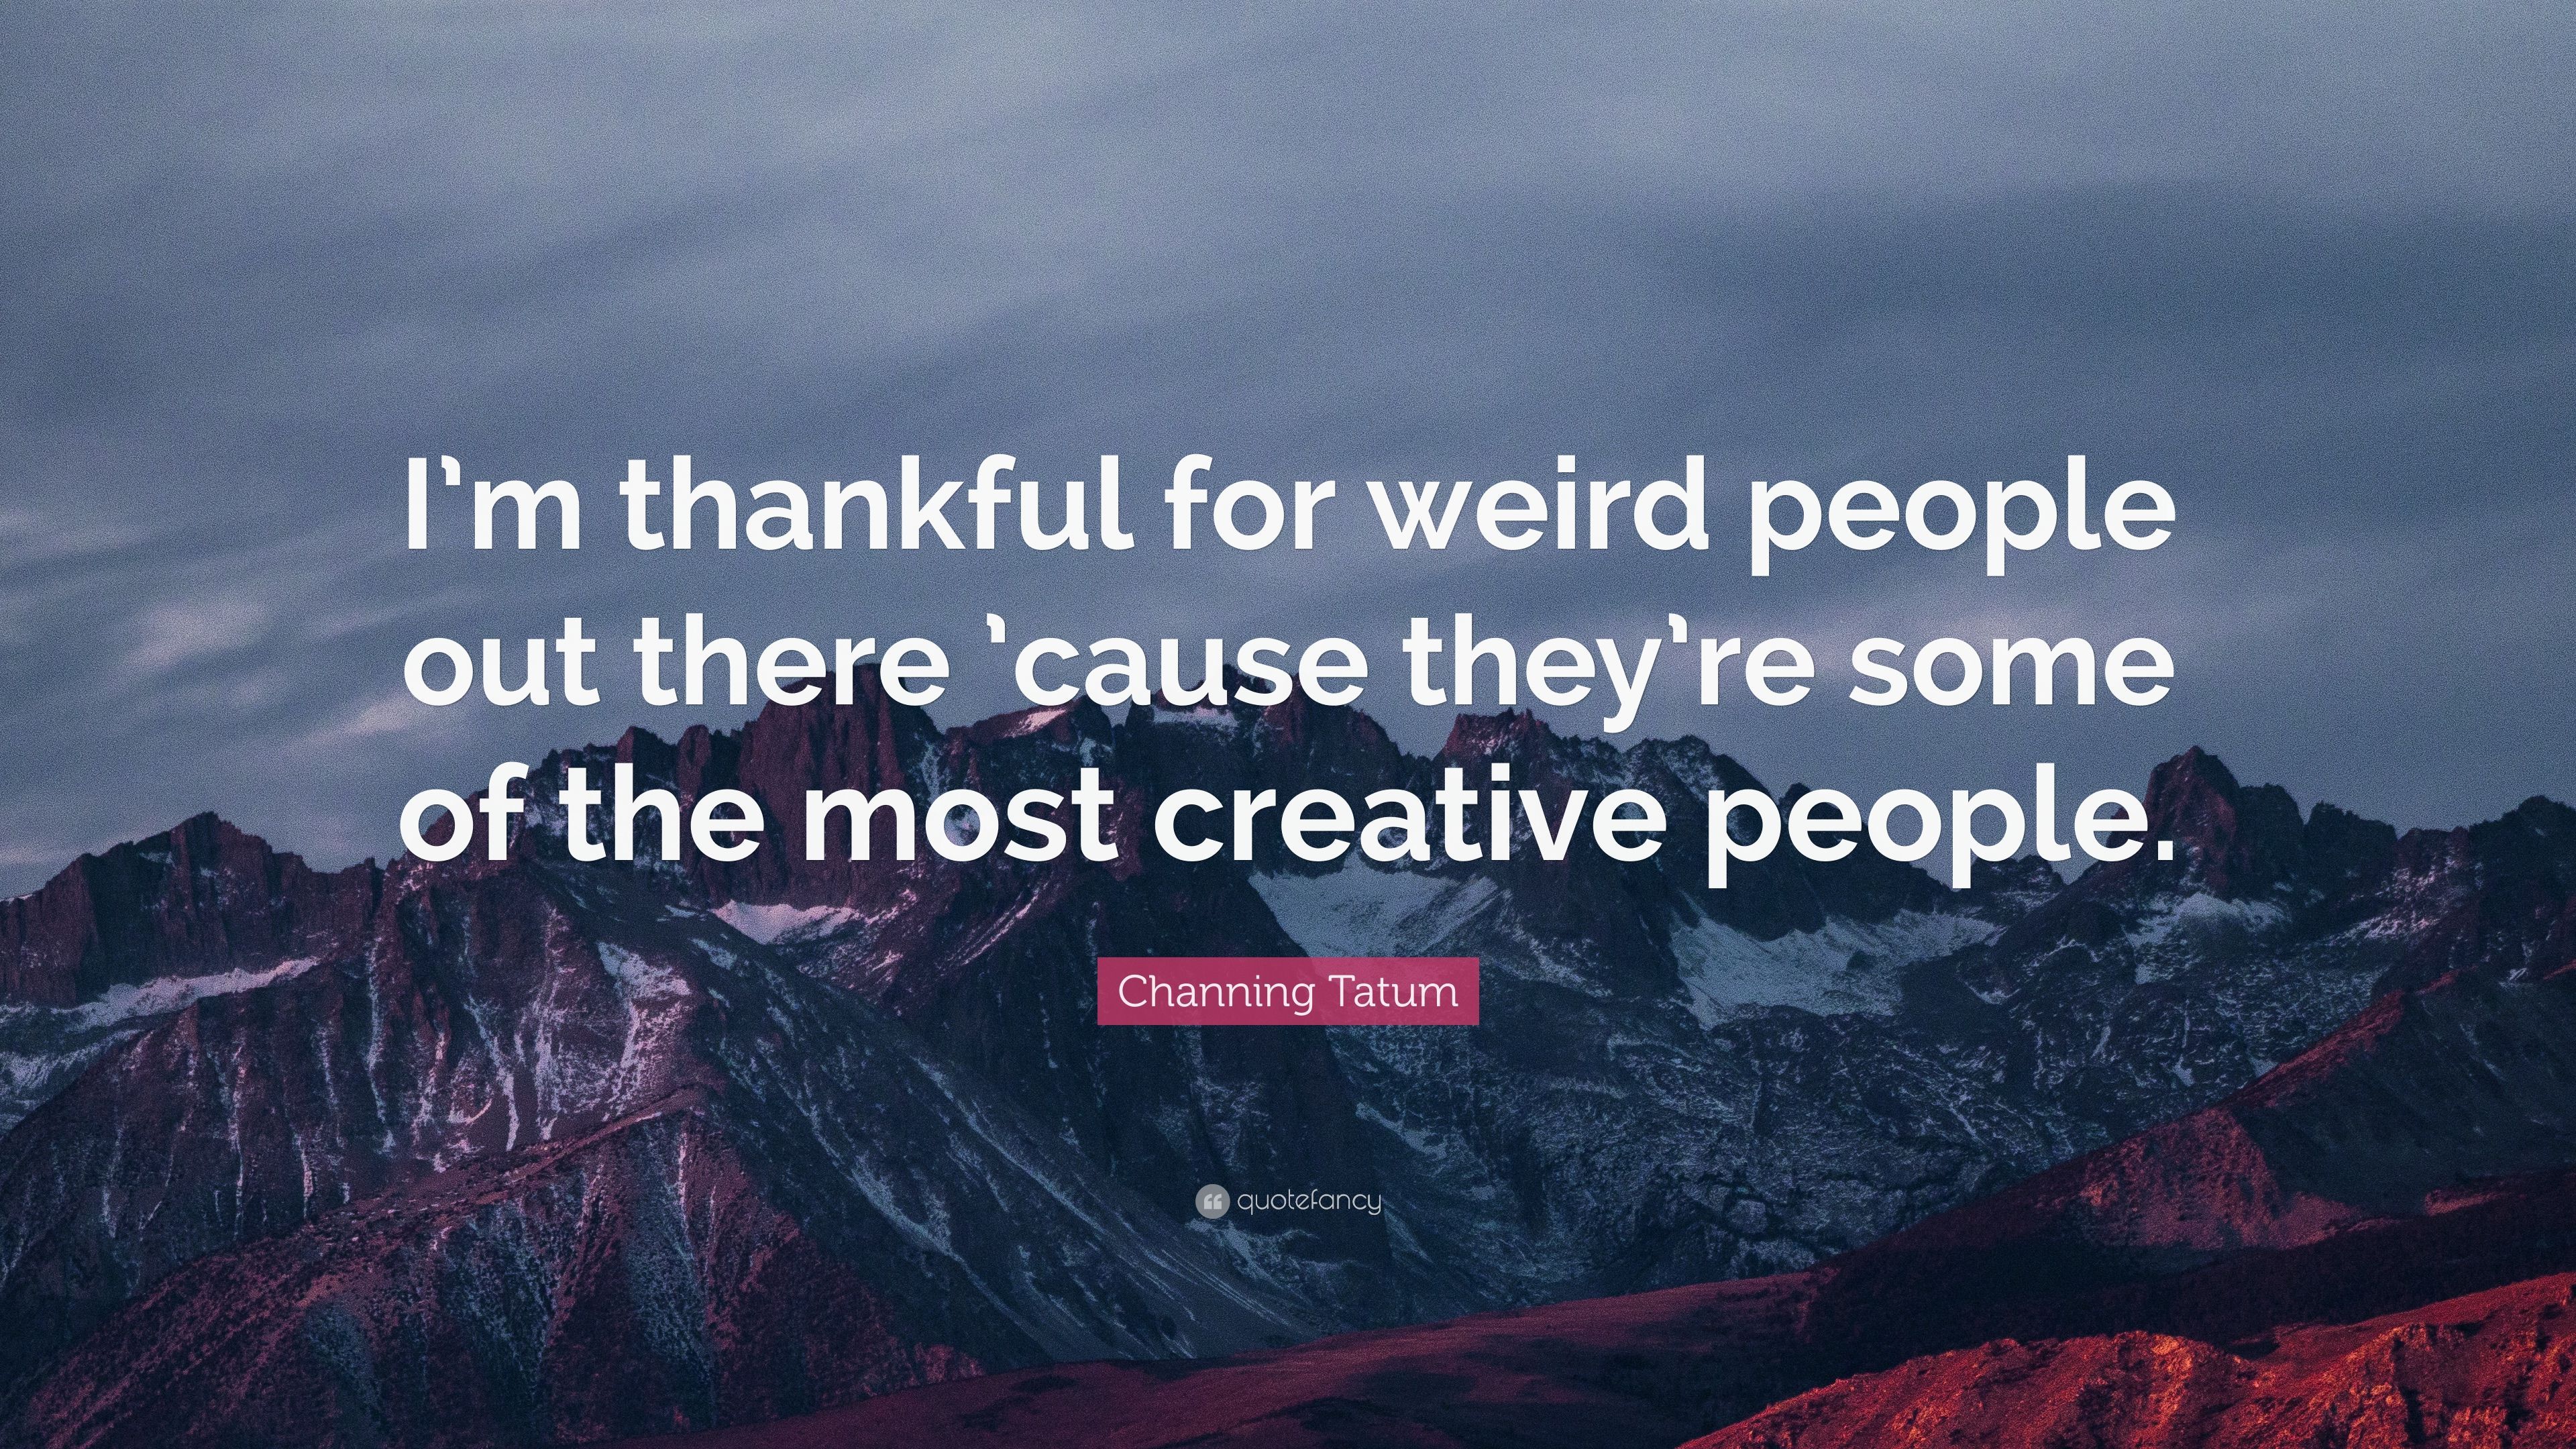 Channing Tatum Quote: “I'm thankful for weird people out there